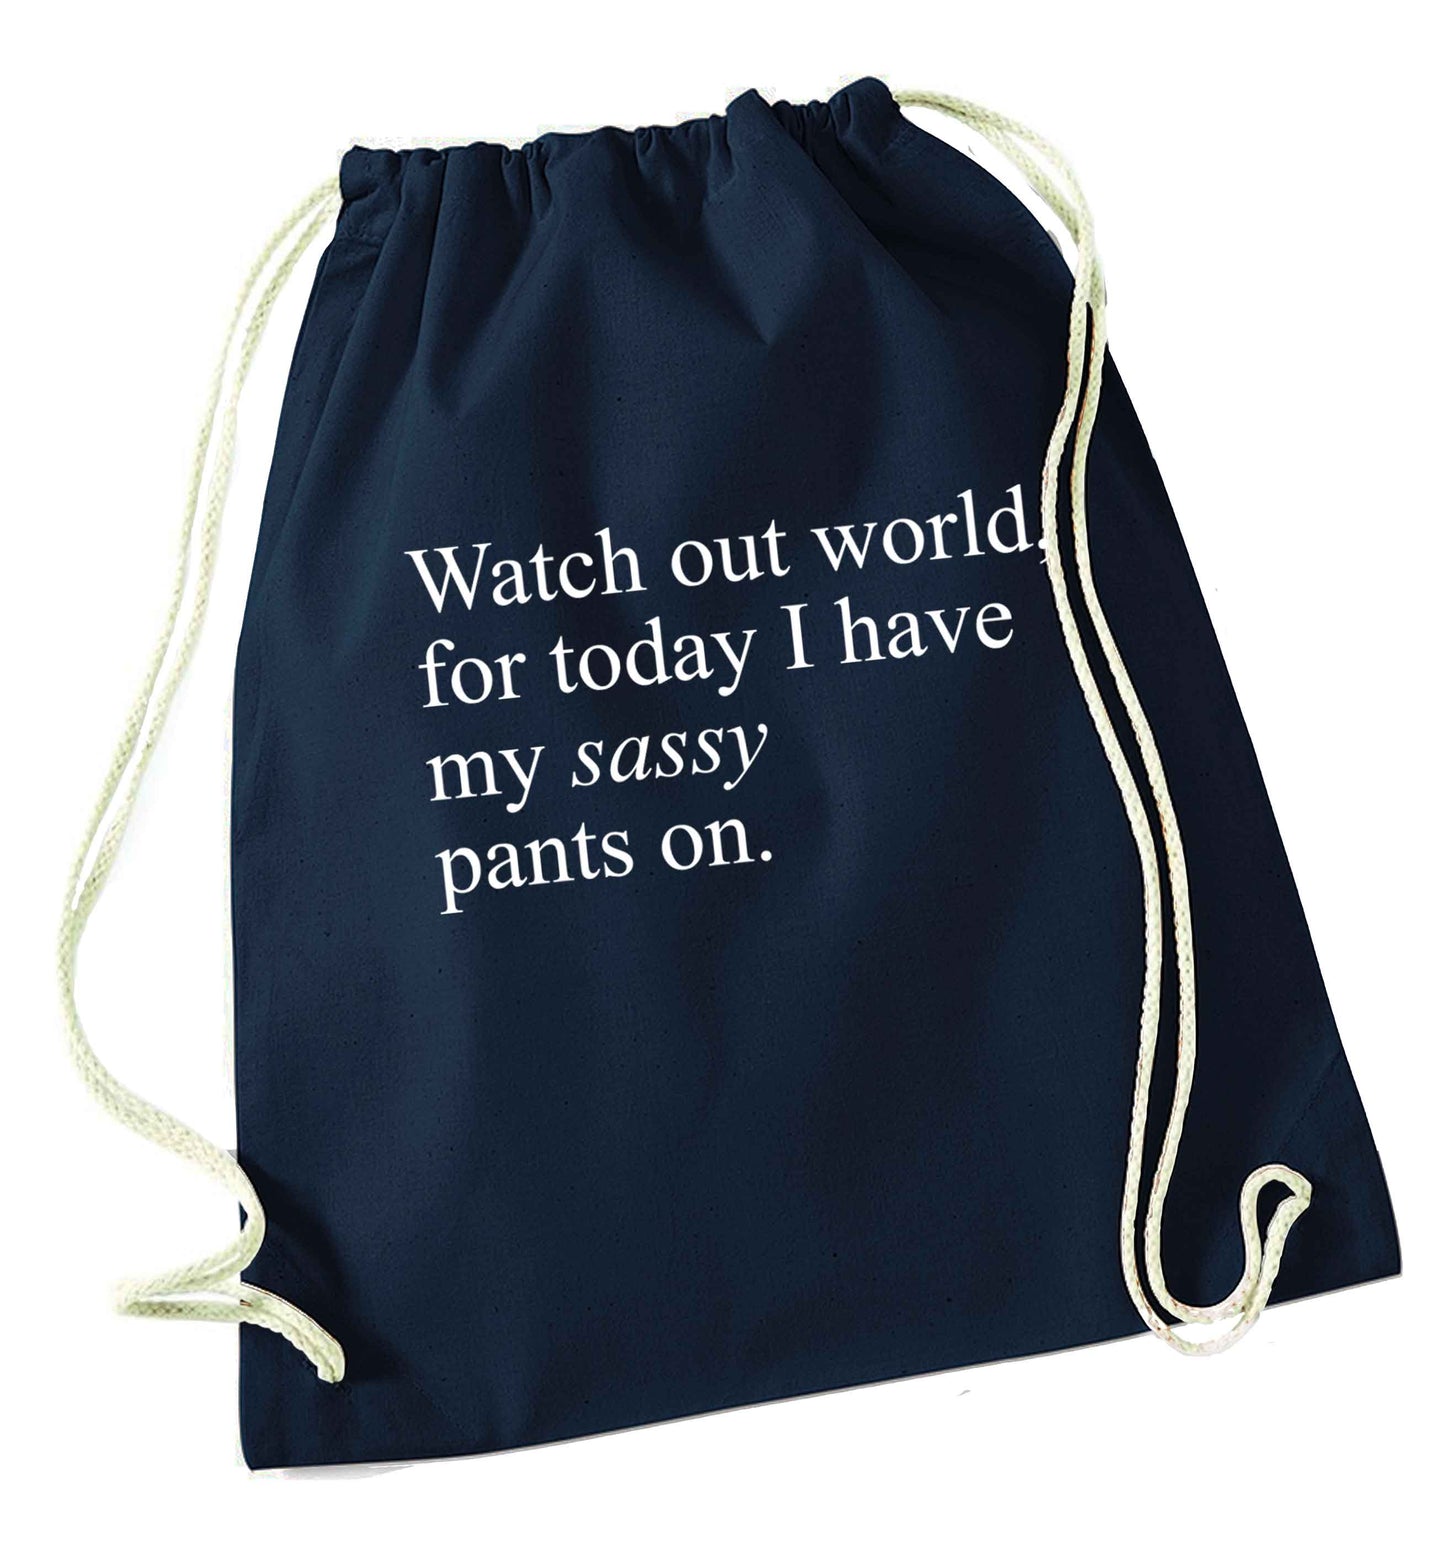 Watch out world for today I have my sassy pants on navy drawstring bag